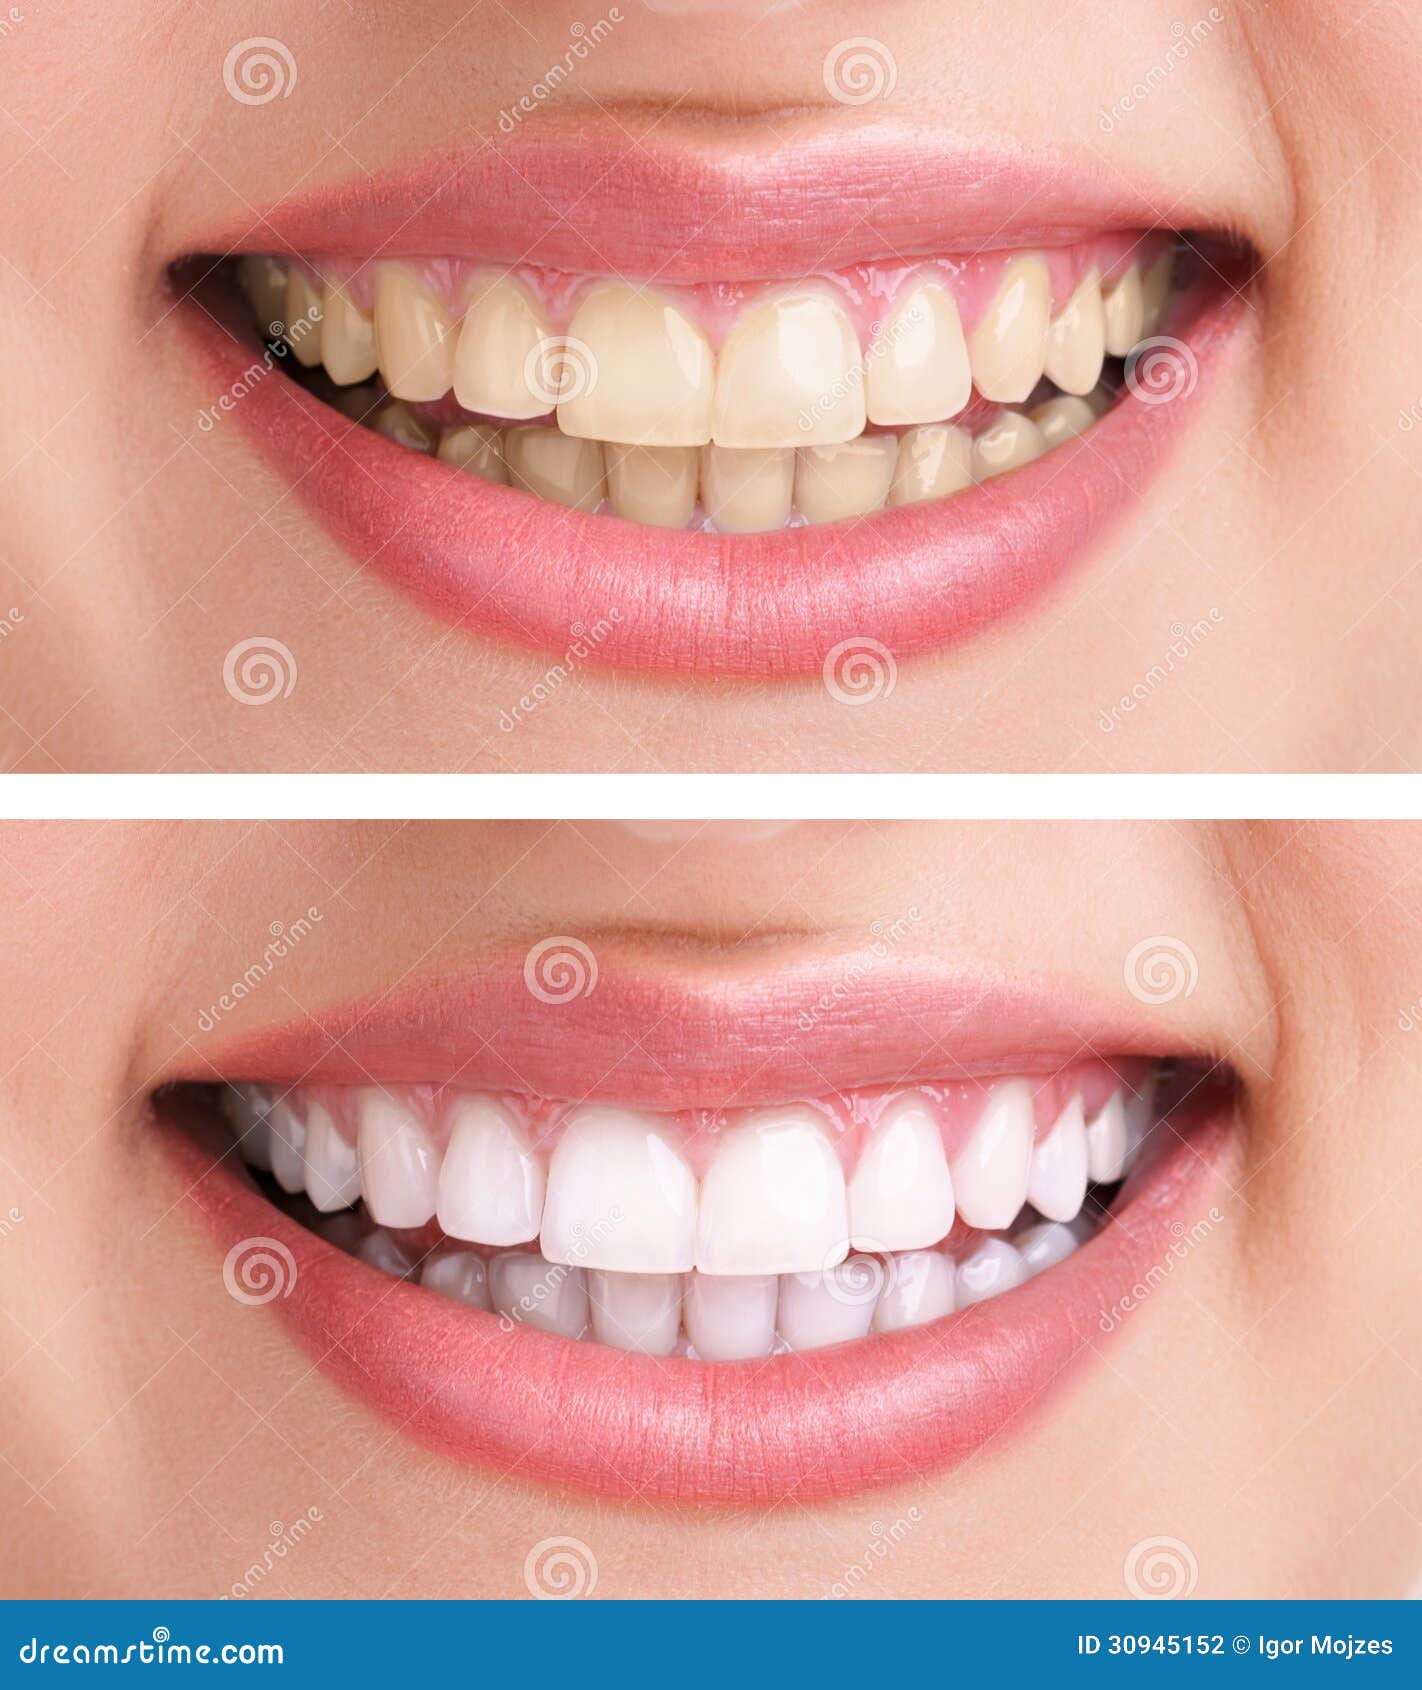 healthy teeth and smile